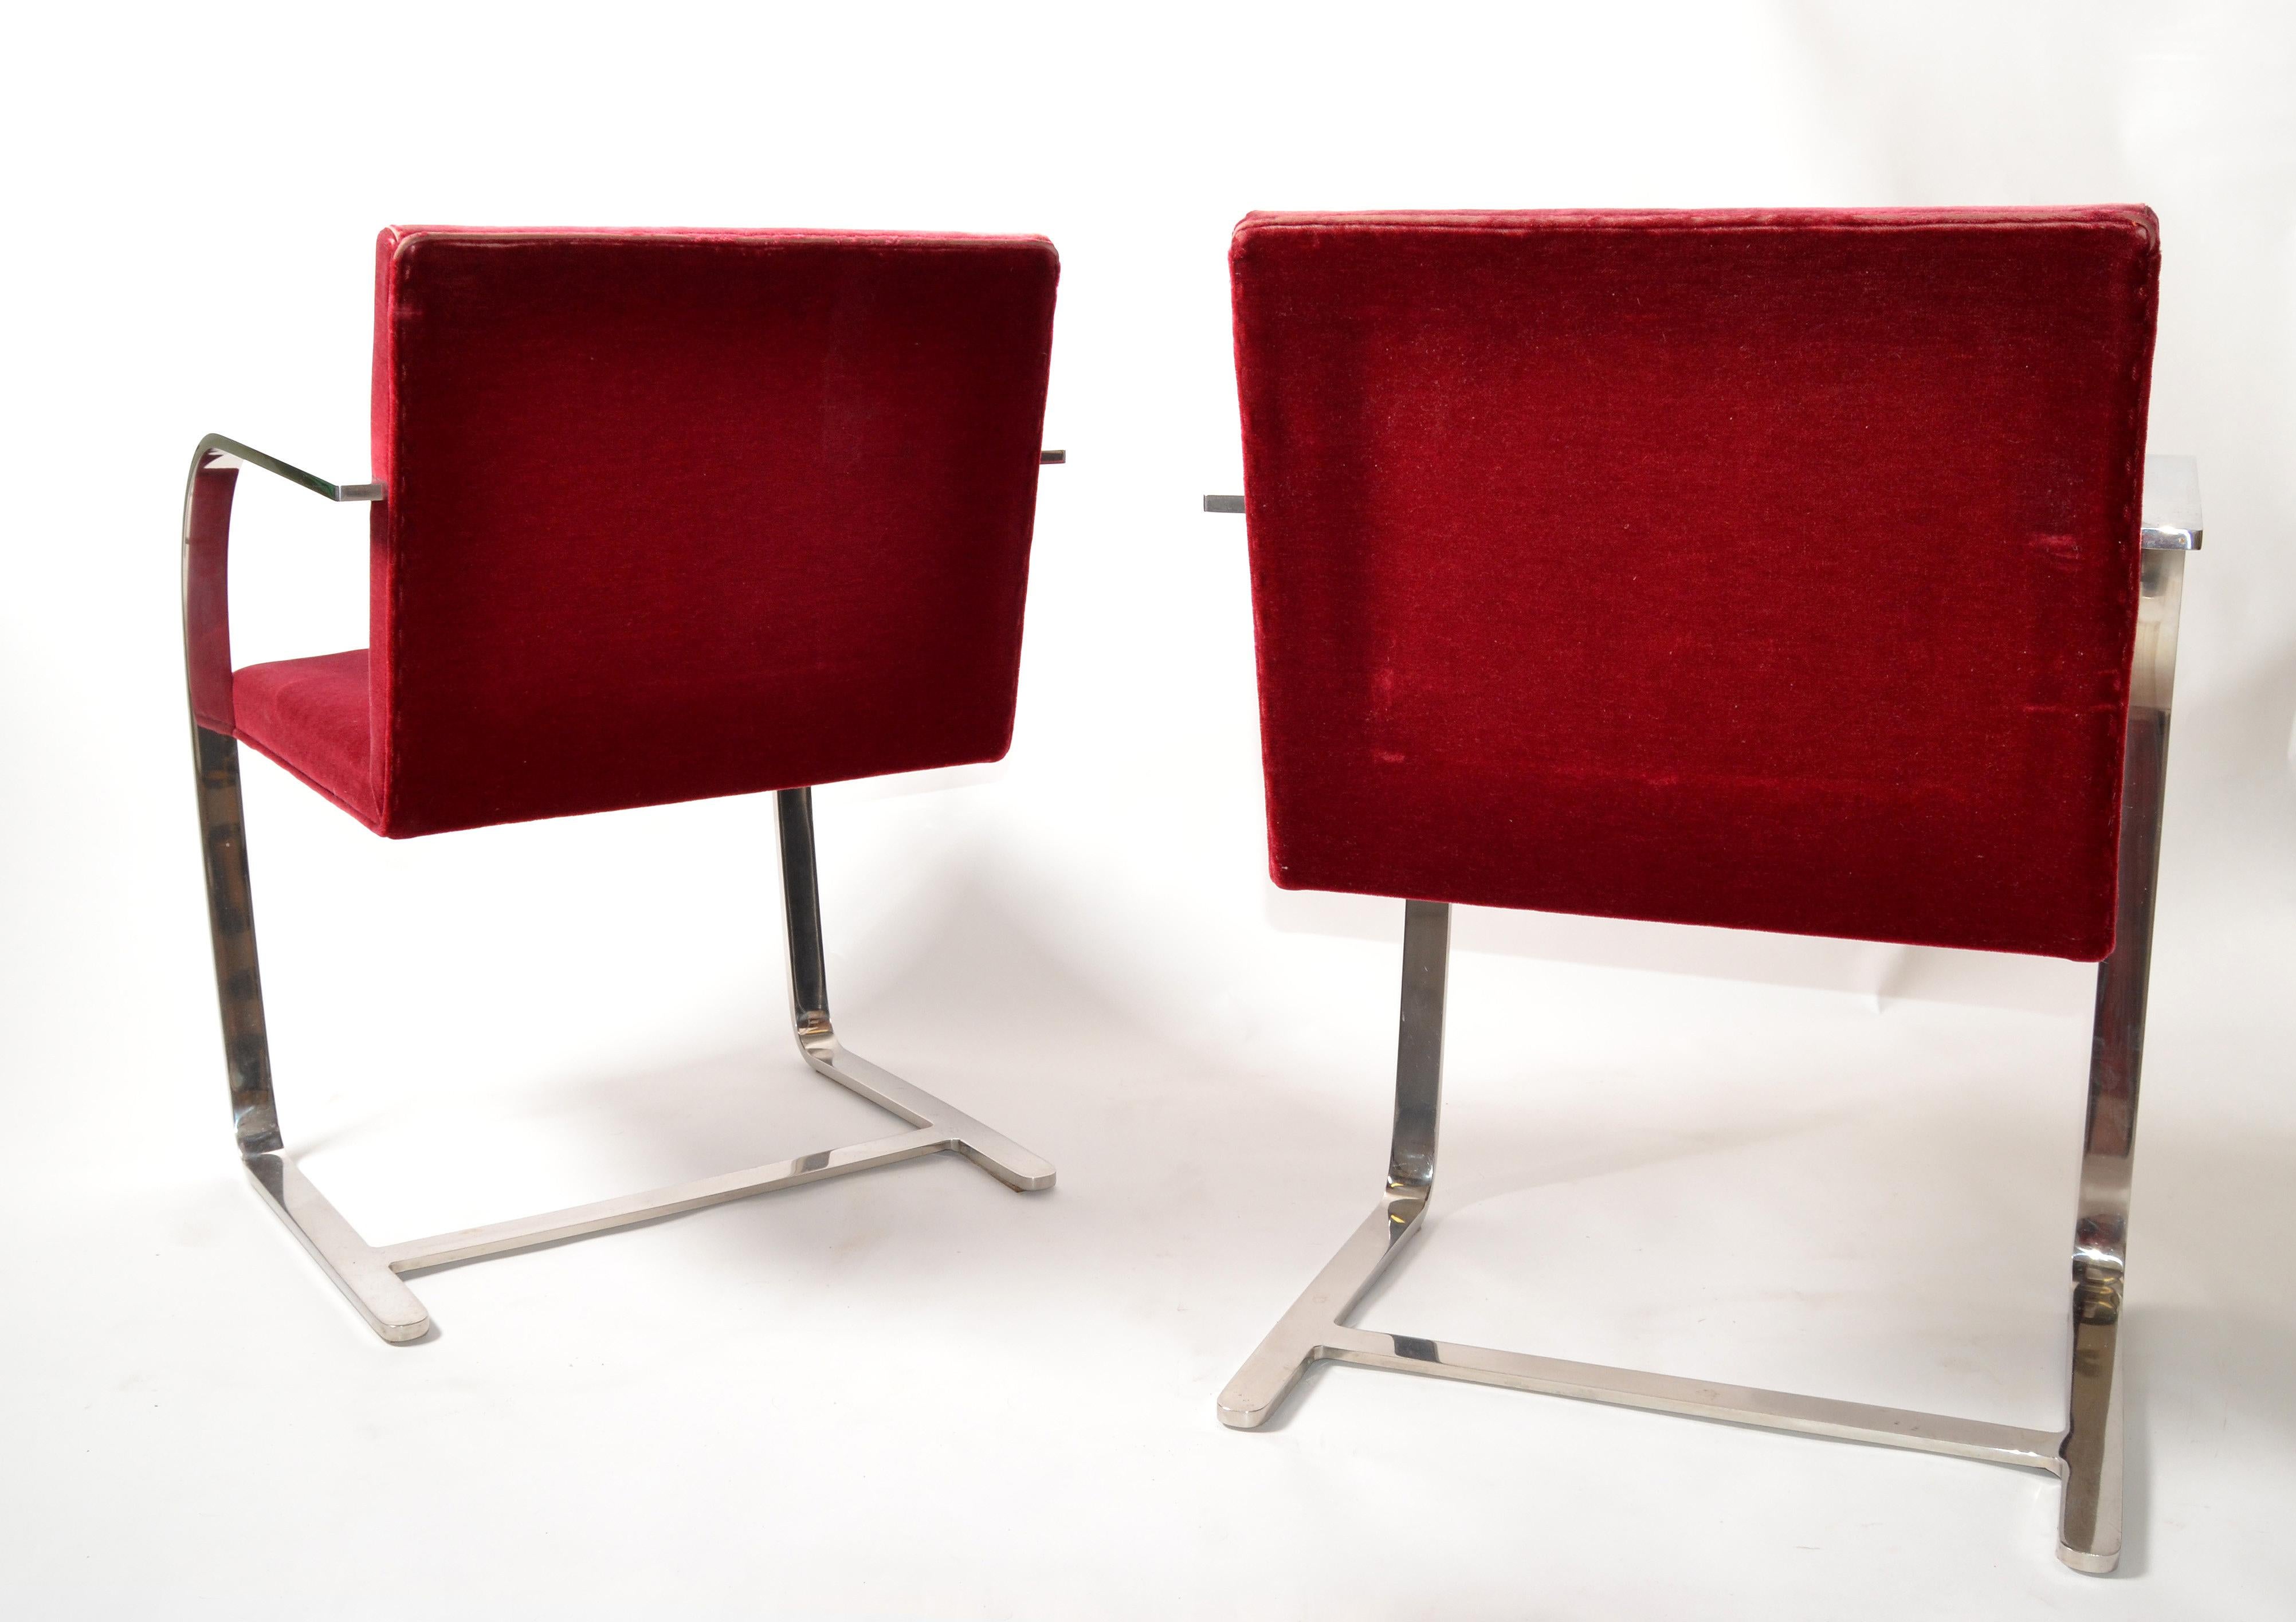 Mies Van Der Rohe for Knoll Stainless Steel Brno Chairs Red Velvet 1979, Pair For Sale 2